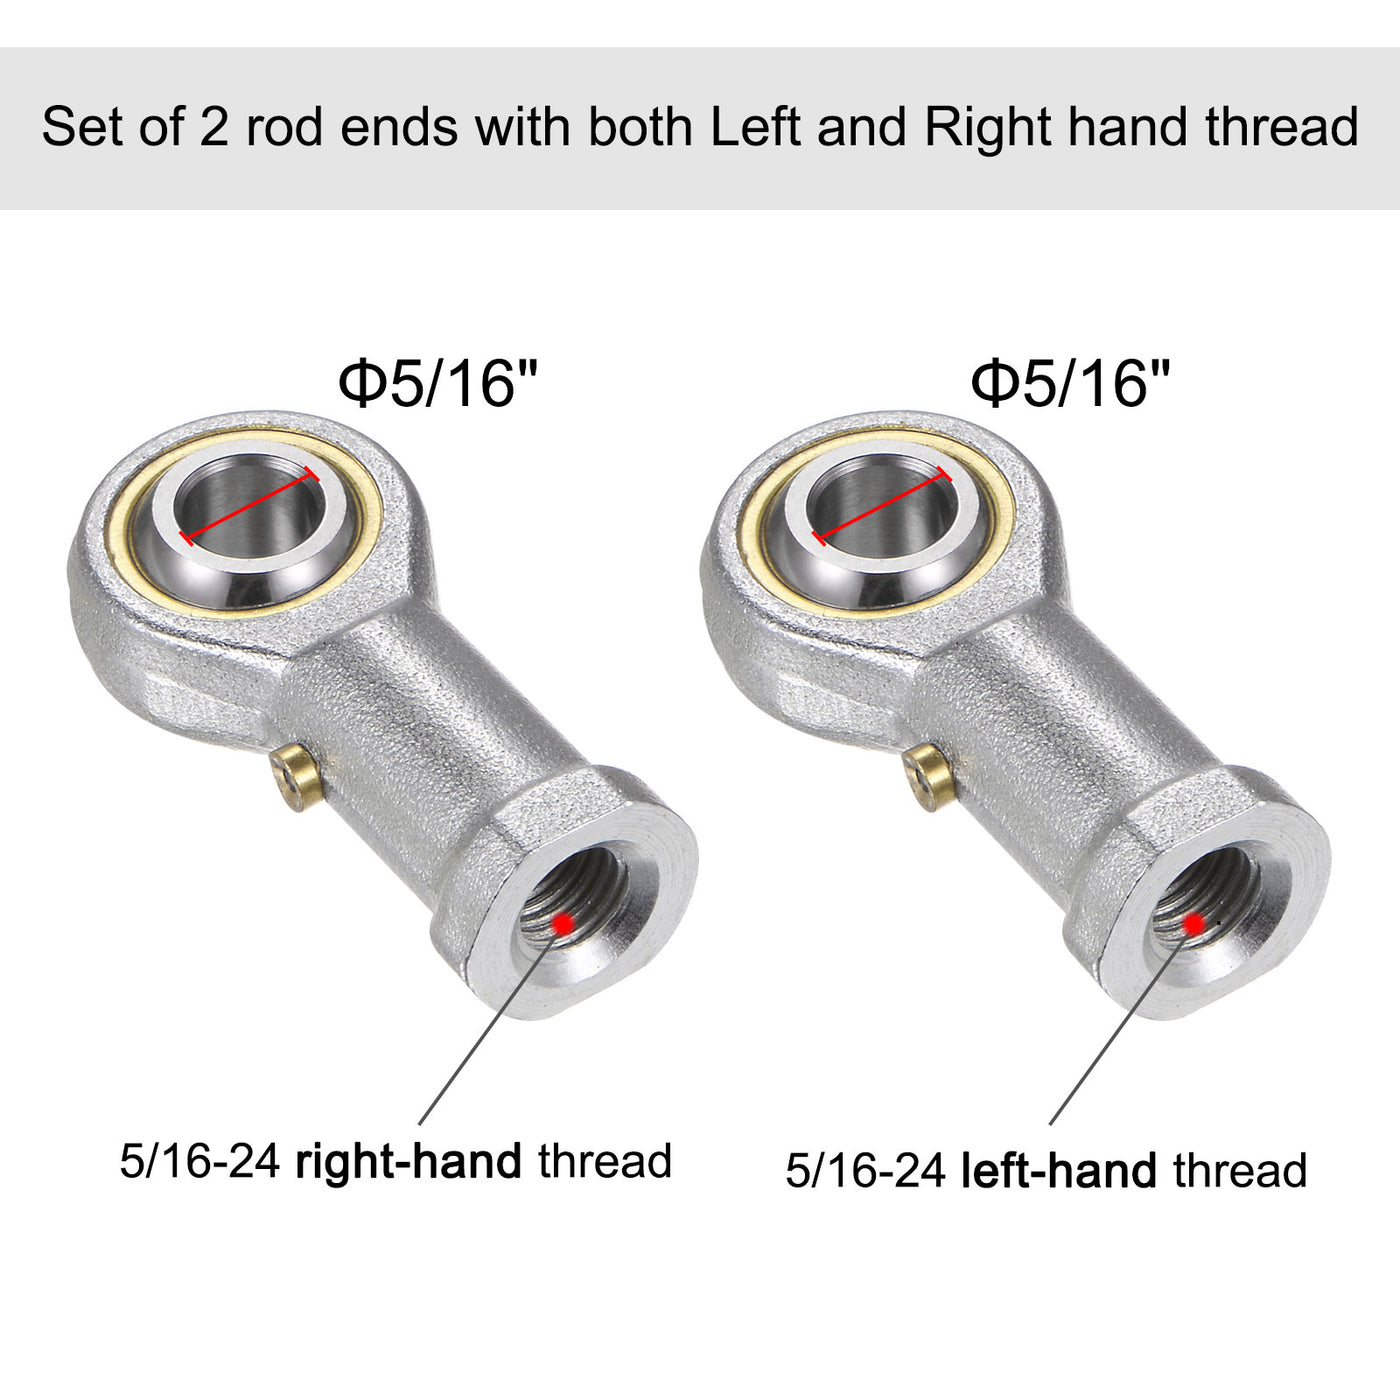 uxcell Uxcell PHSB5 5/16 Female Rod End Set - 2pcs of 5/16-24 Left & Right Thread with Jam Nut